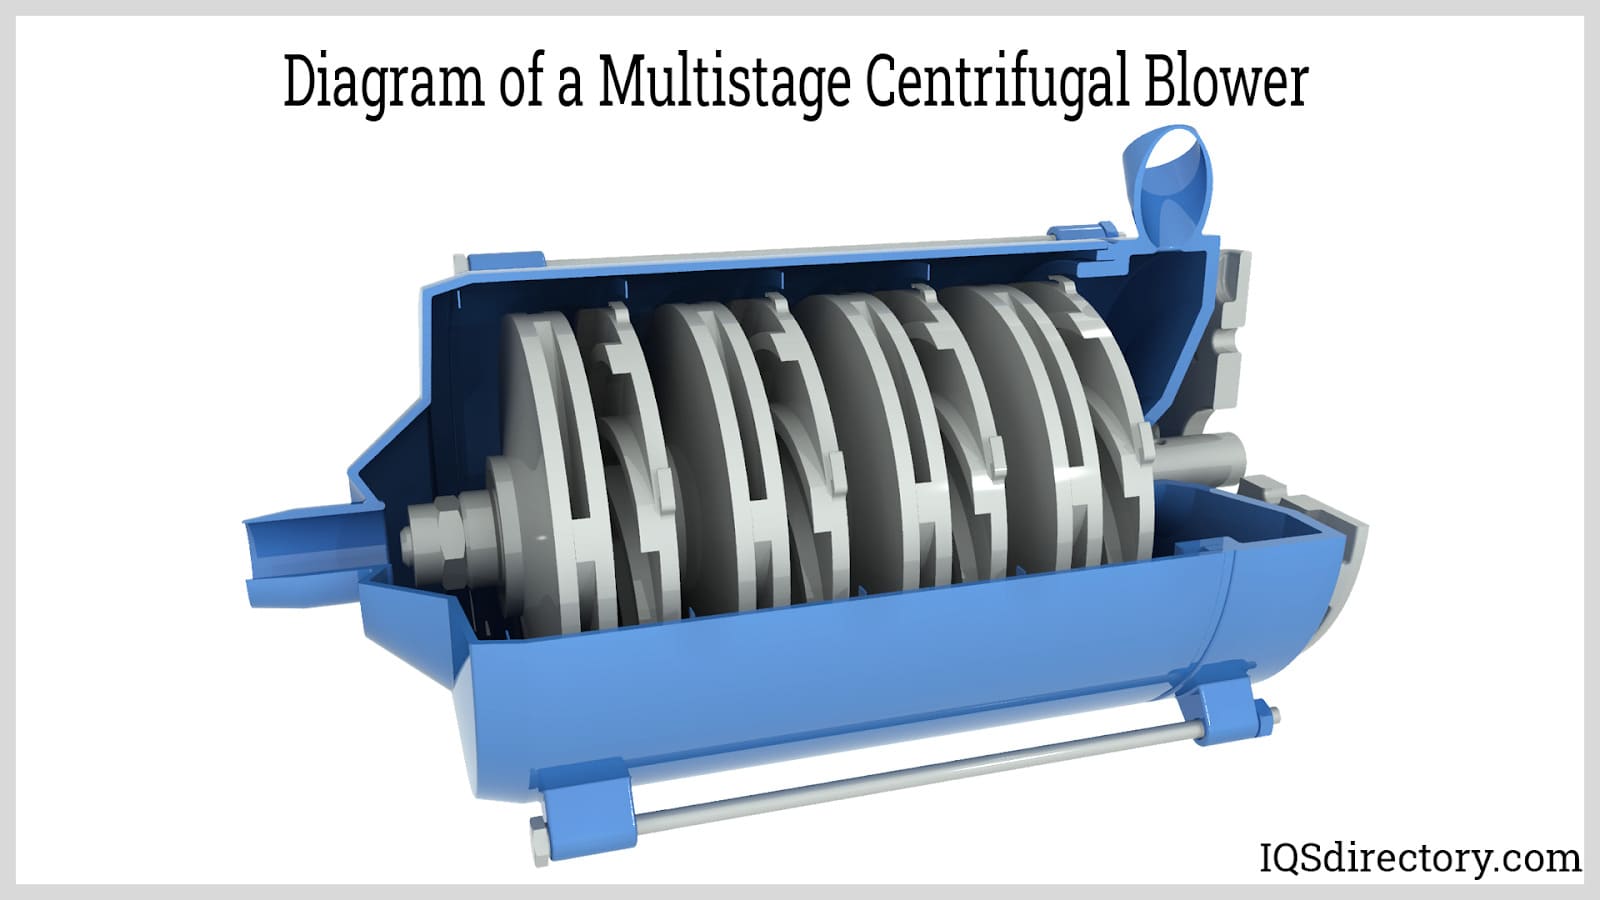 Diagram of a Multistage Centrifugal Blower